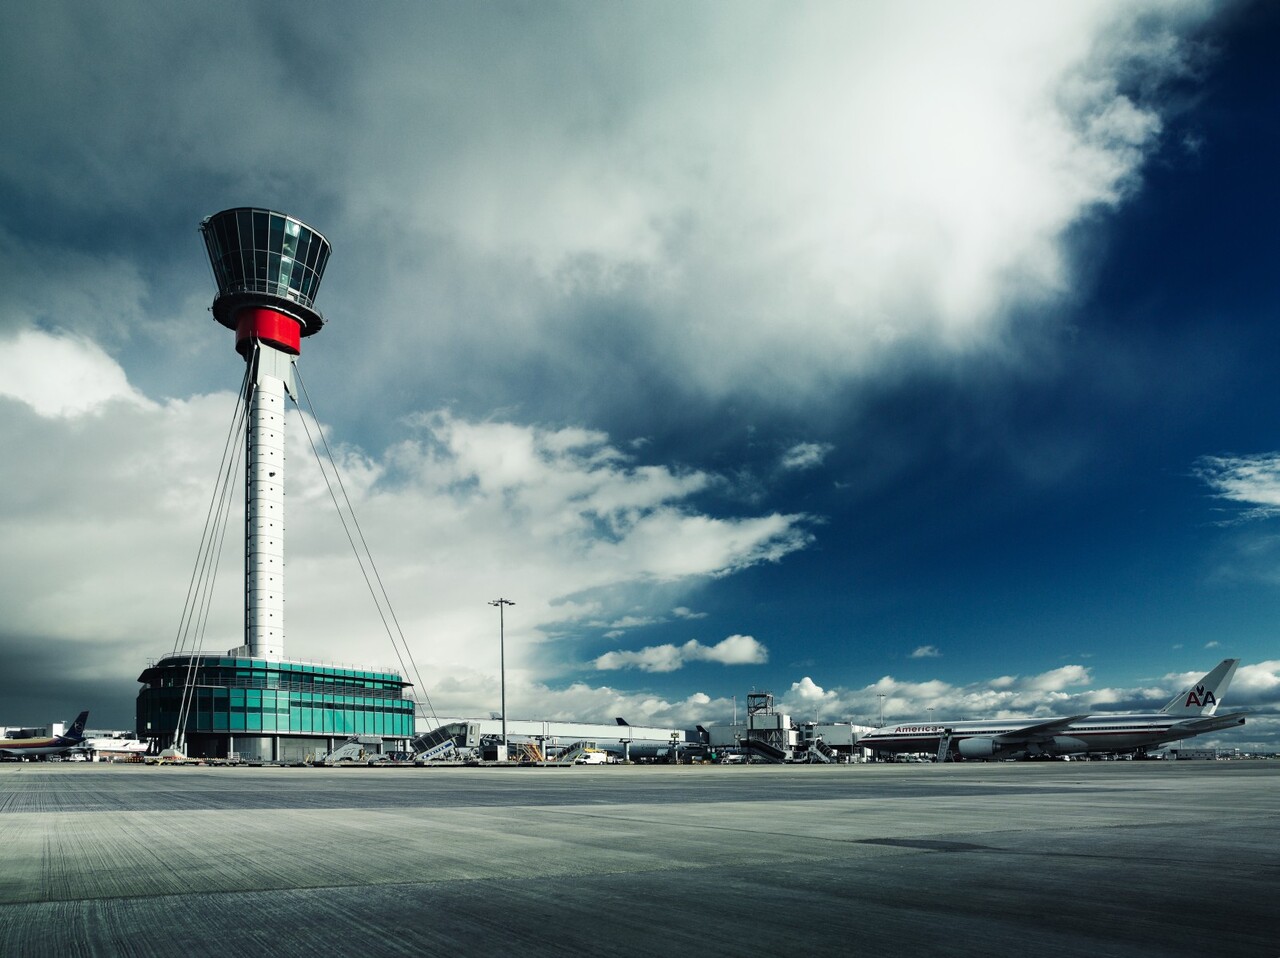 UK hub becomes one of the world’s first airports to trial use of lower carbon concrete